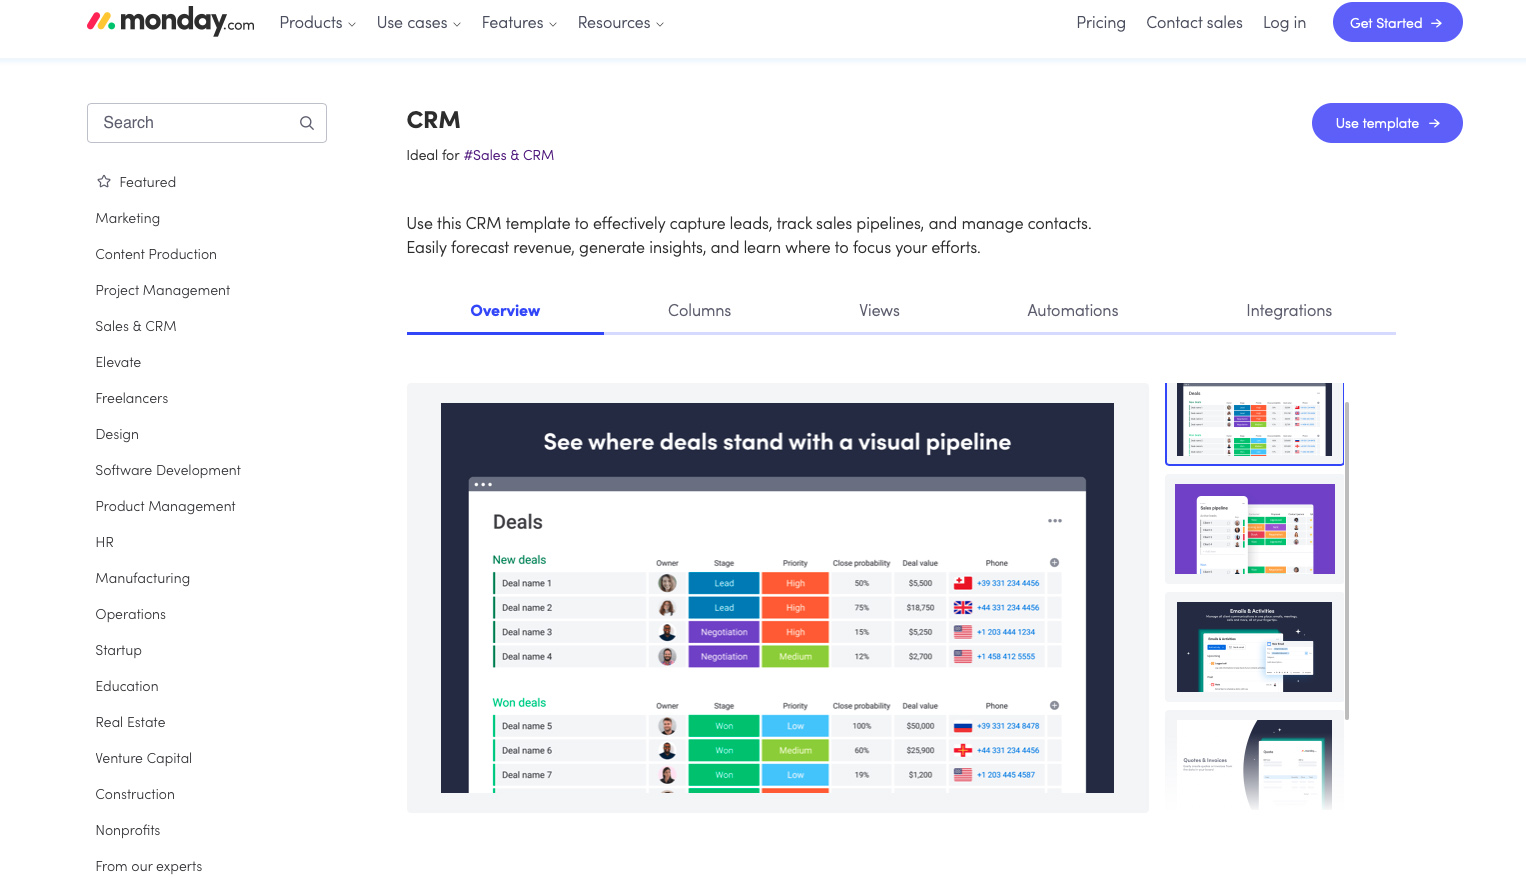 CRM Templates Page in monday.com.